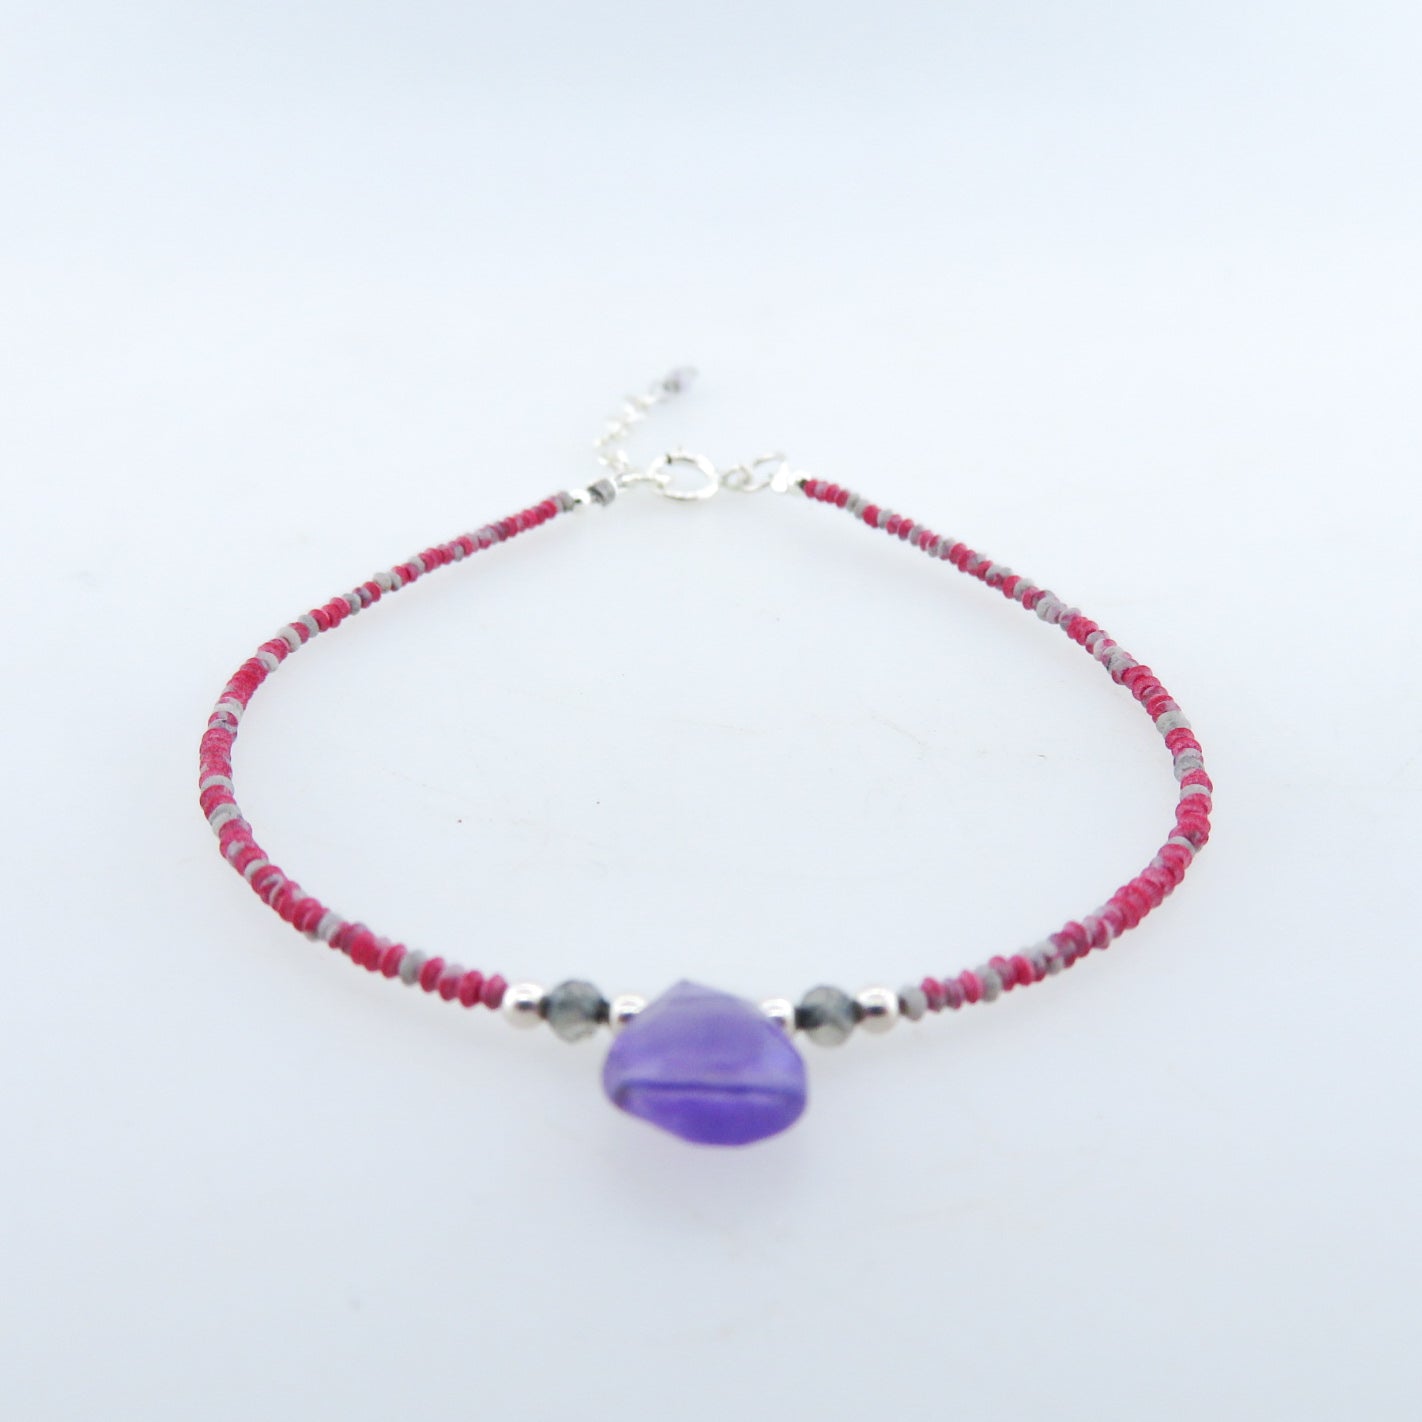 Coral Bracelet with Amethyst, Labradorite and Silver Beads